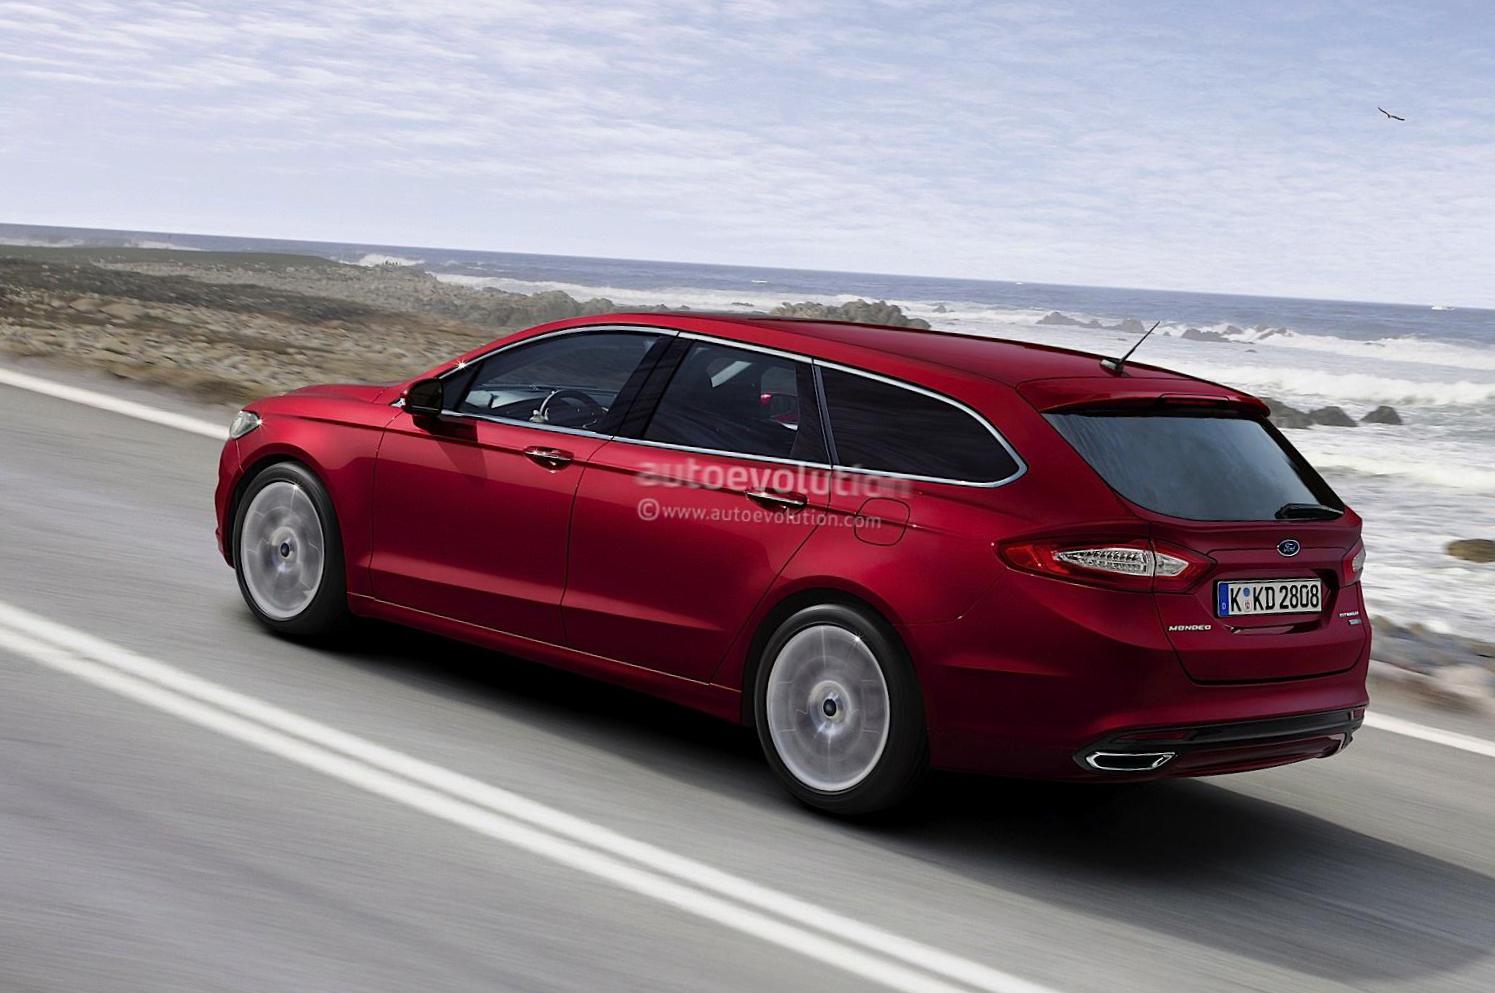 Ford Mondeo and Specs. Photo: Mondeo Wagon usa and 24 perfect photos of Mondeo Wagon